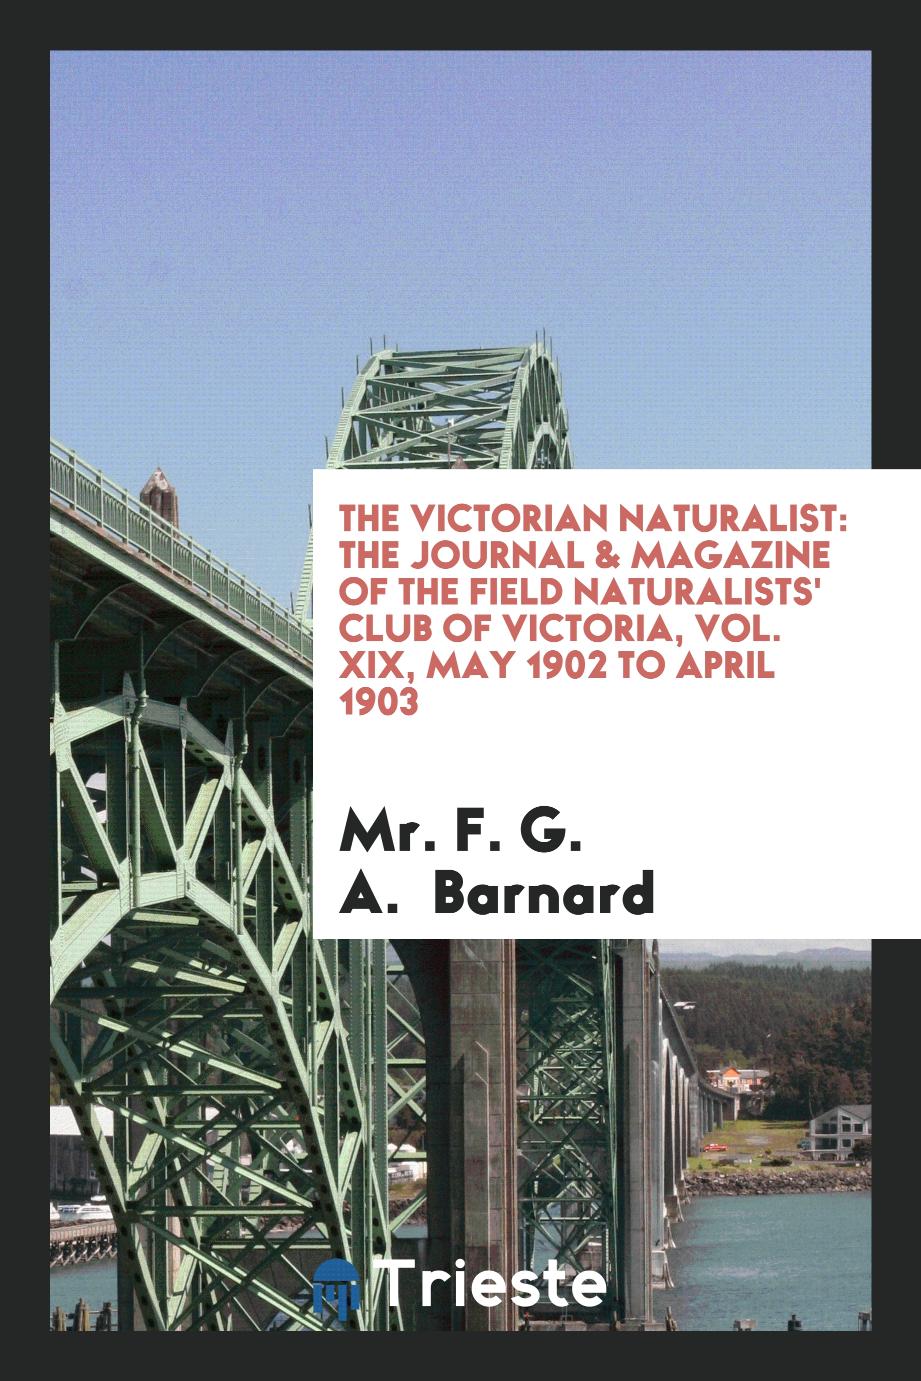 The Victorian naturalist: The journal & magazine of the Field Naturalists' Club of Victoria, Vol. XIX, may 1902 to april 1903